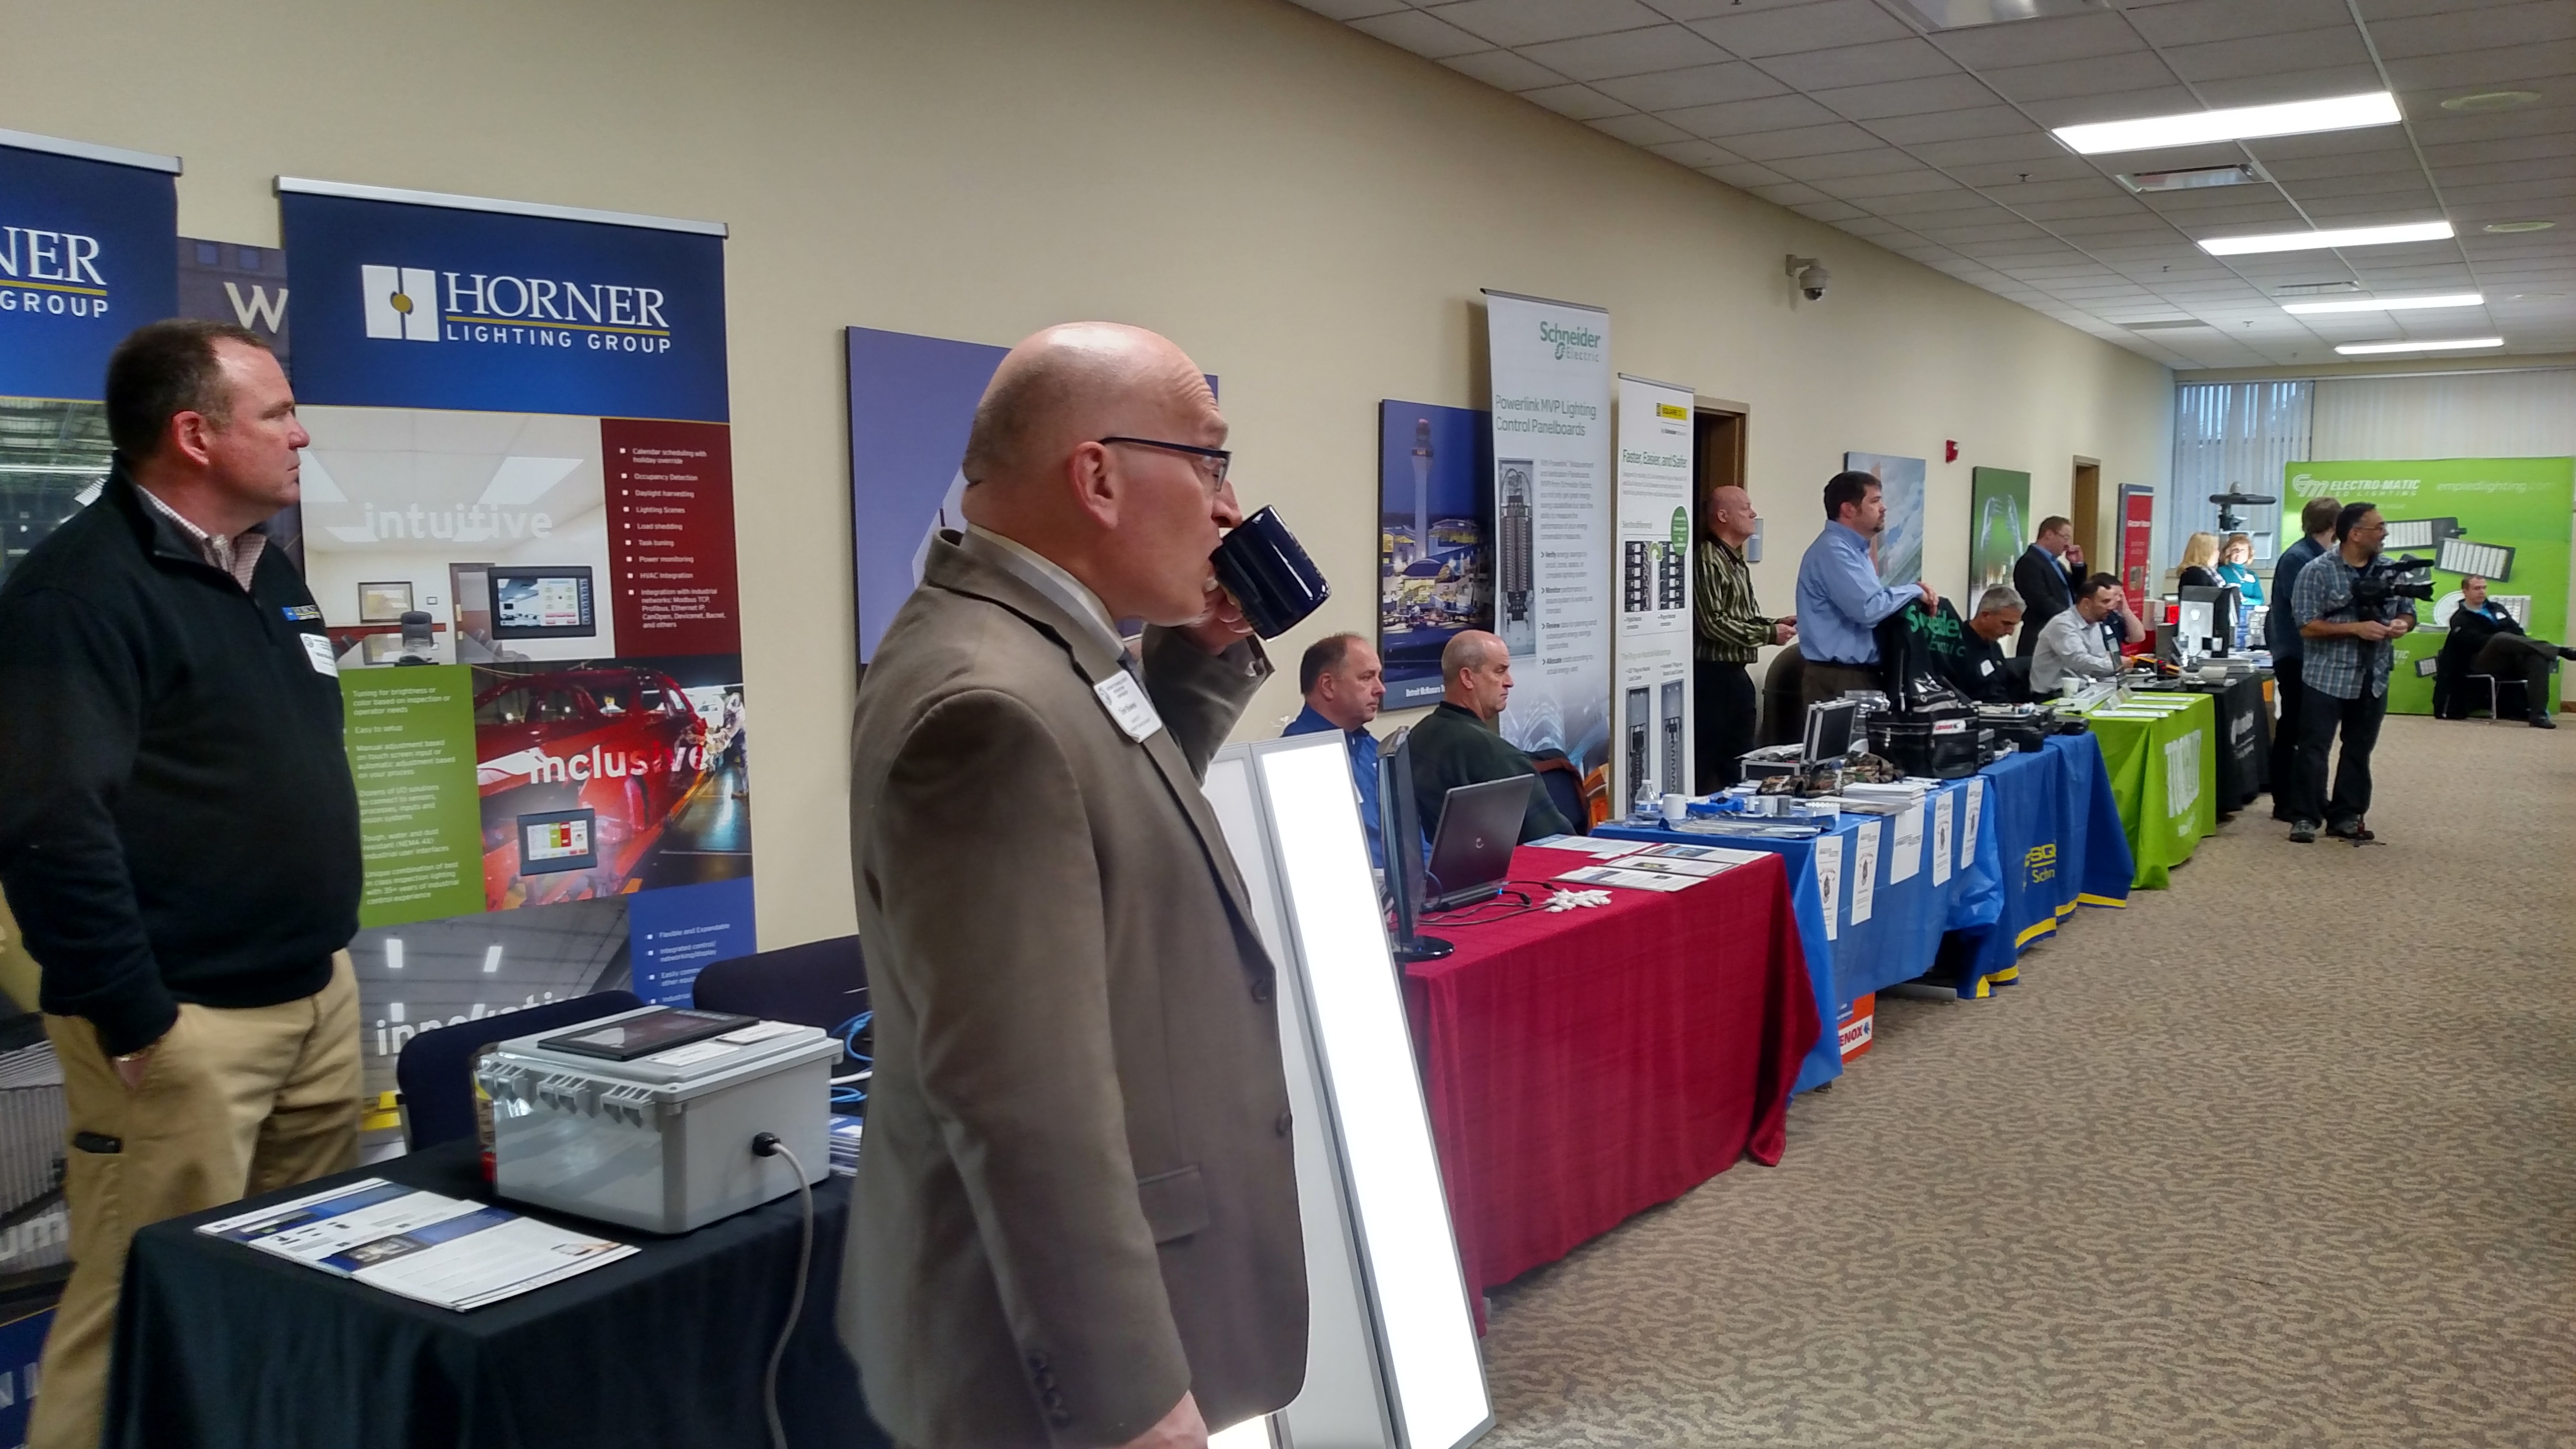 Vendor tables included some of the latest technologies for facilities